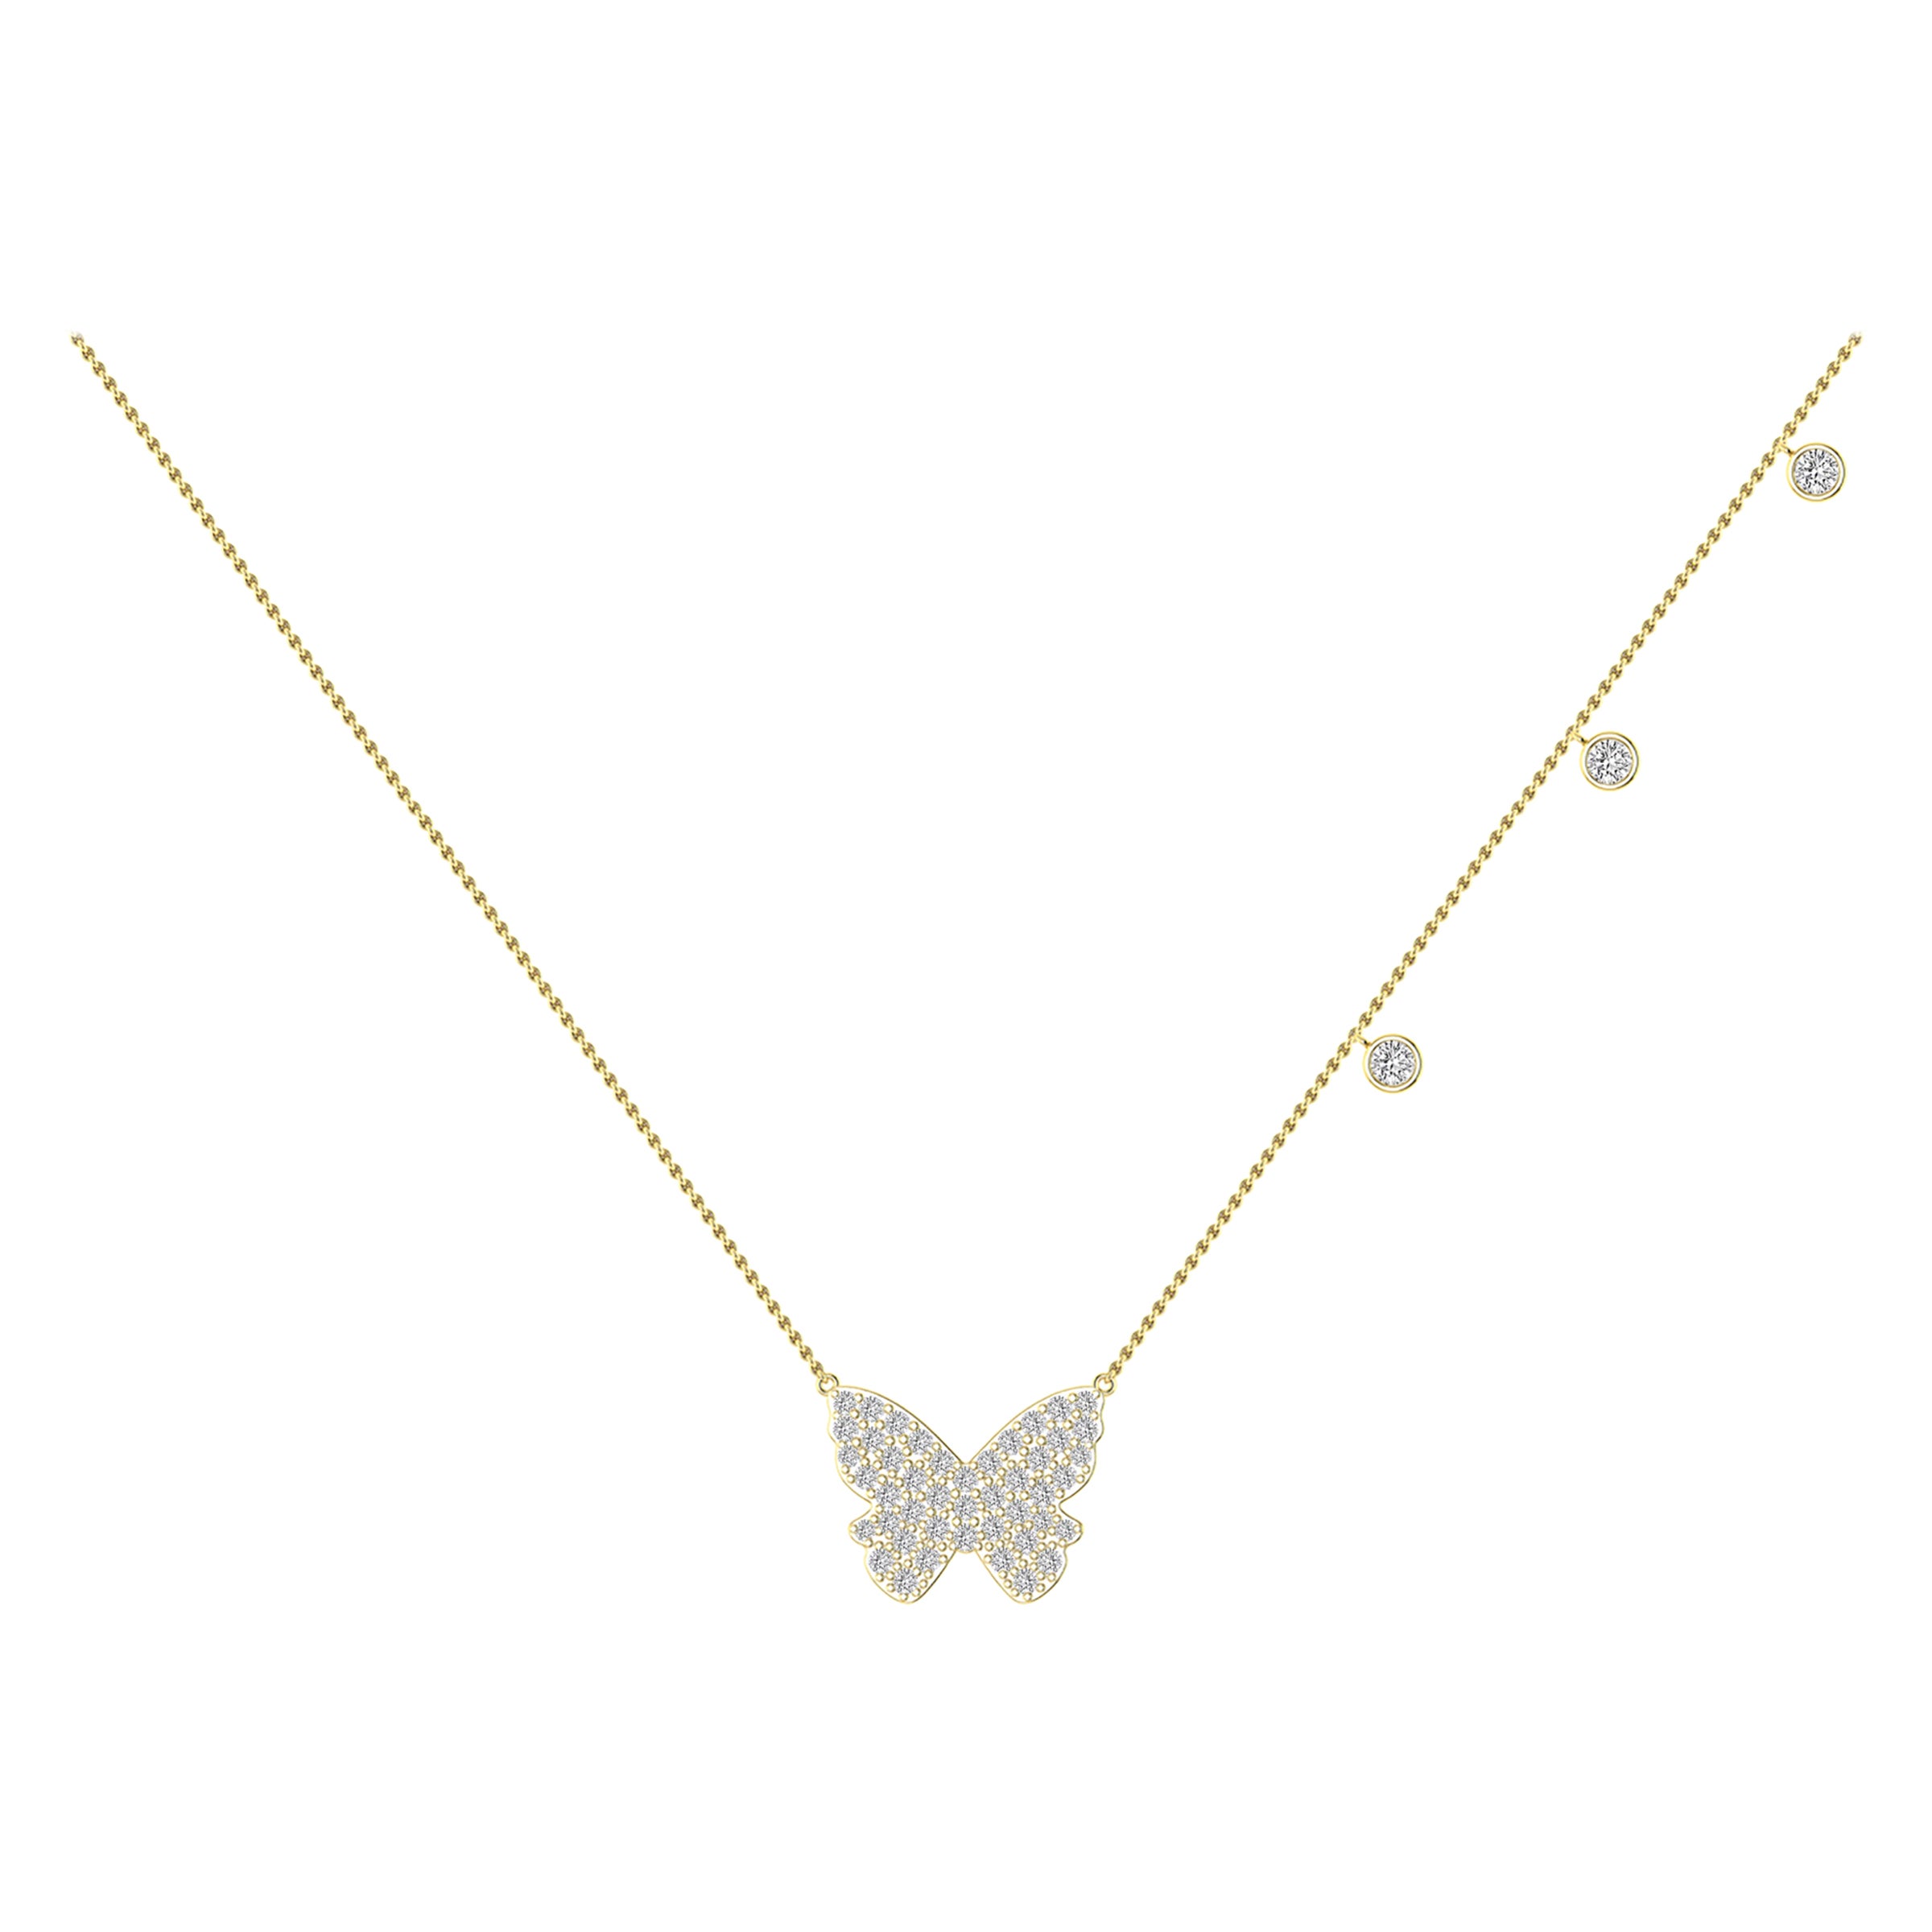 Pave Diamond Butterfly Necklace in 18 Karat Yellow Gold